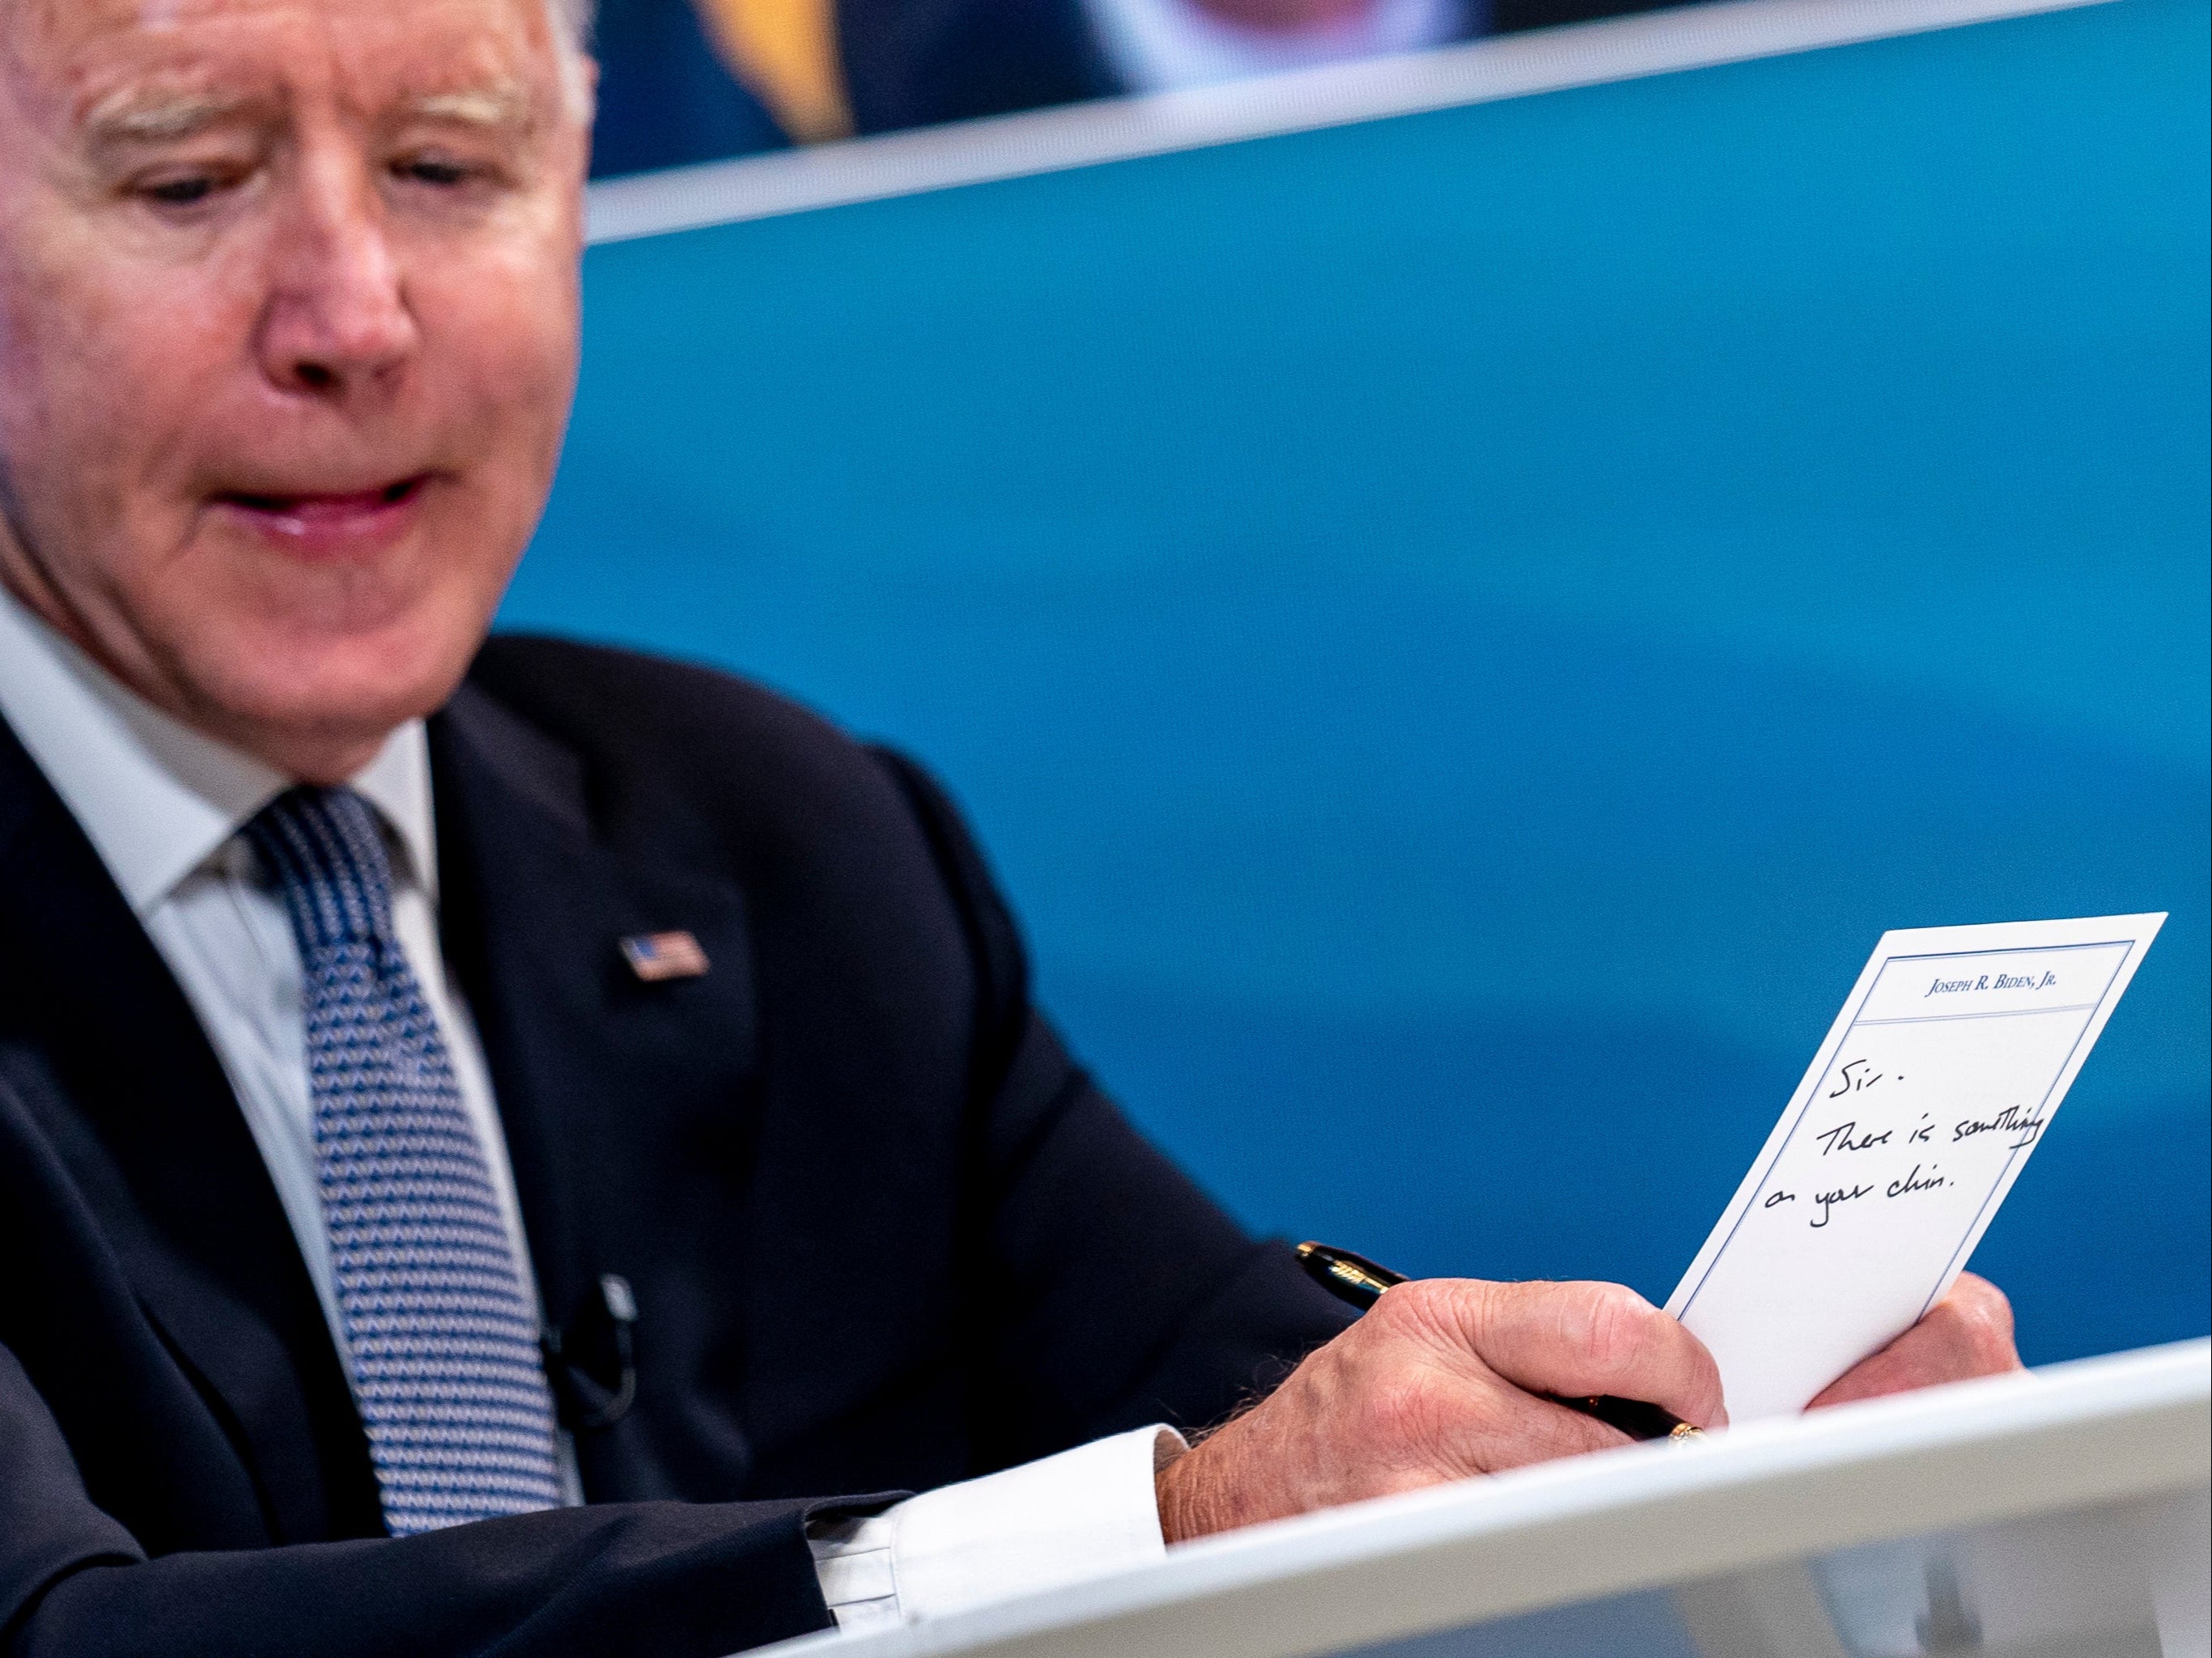 President Joe Biden holds a card handed to him by an aide that reads "Sir, there is something on your chin"